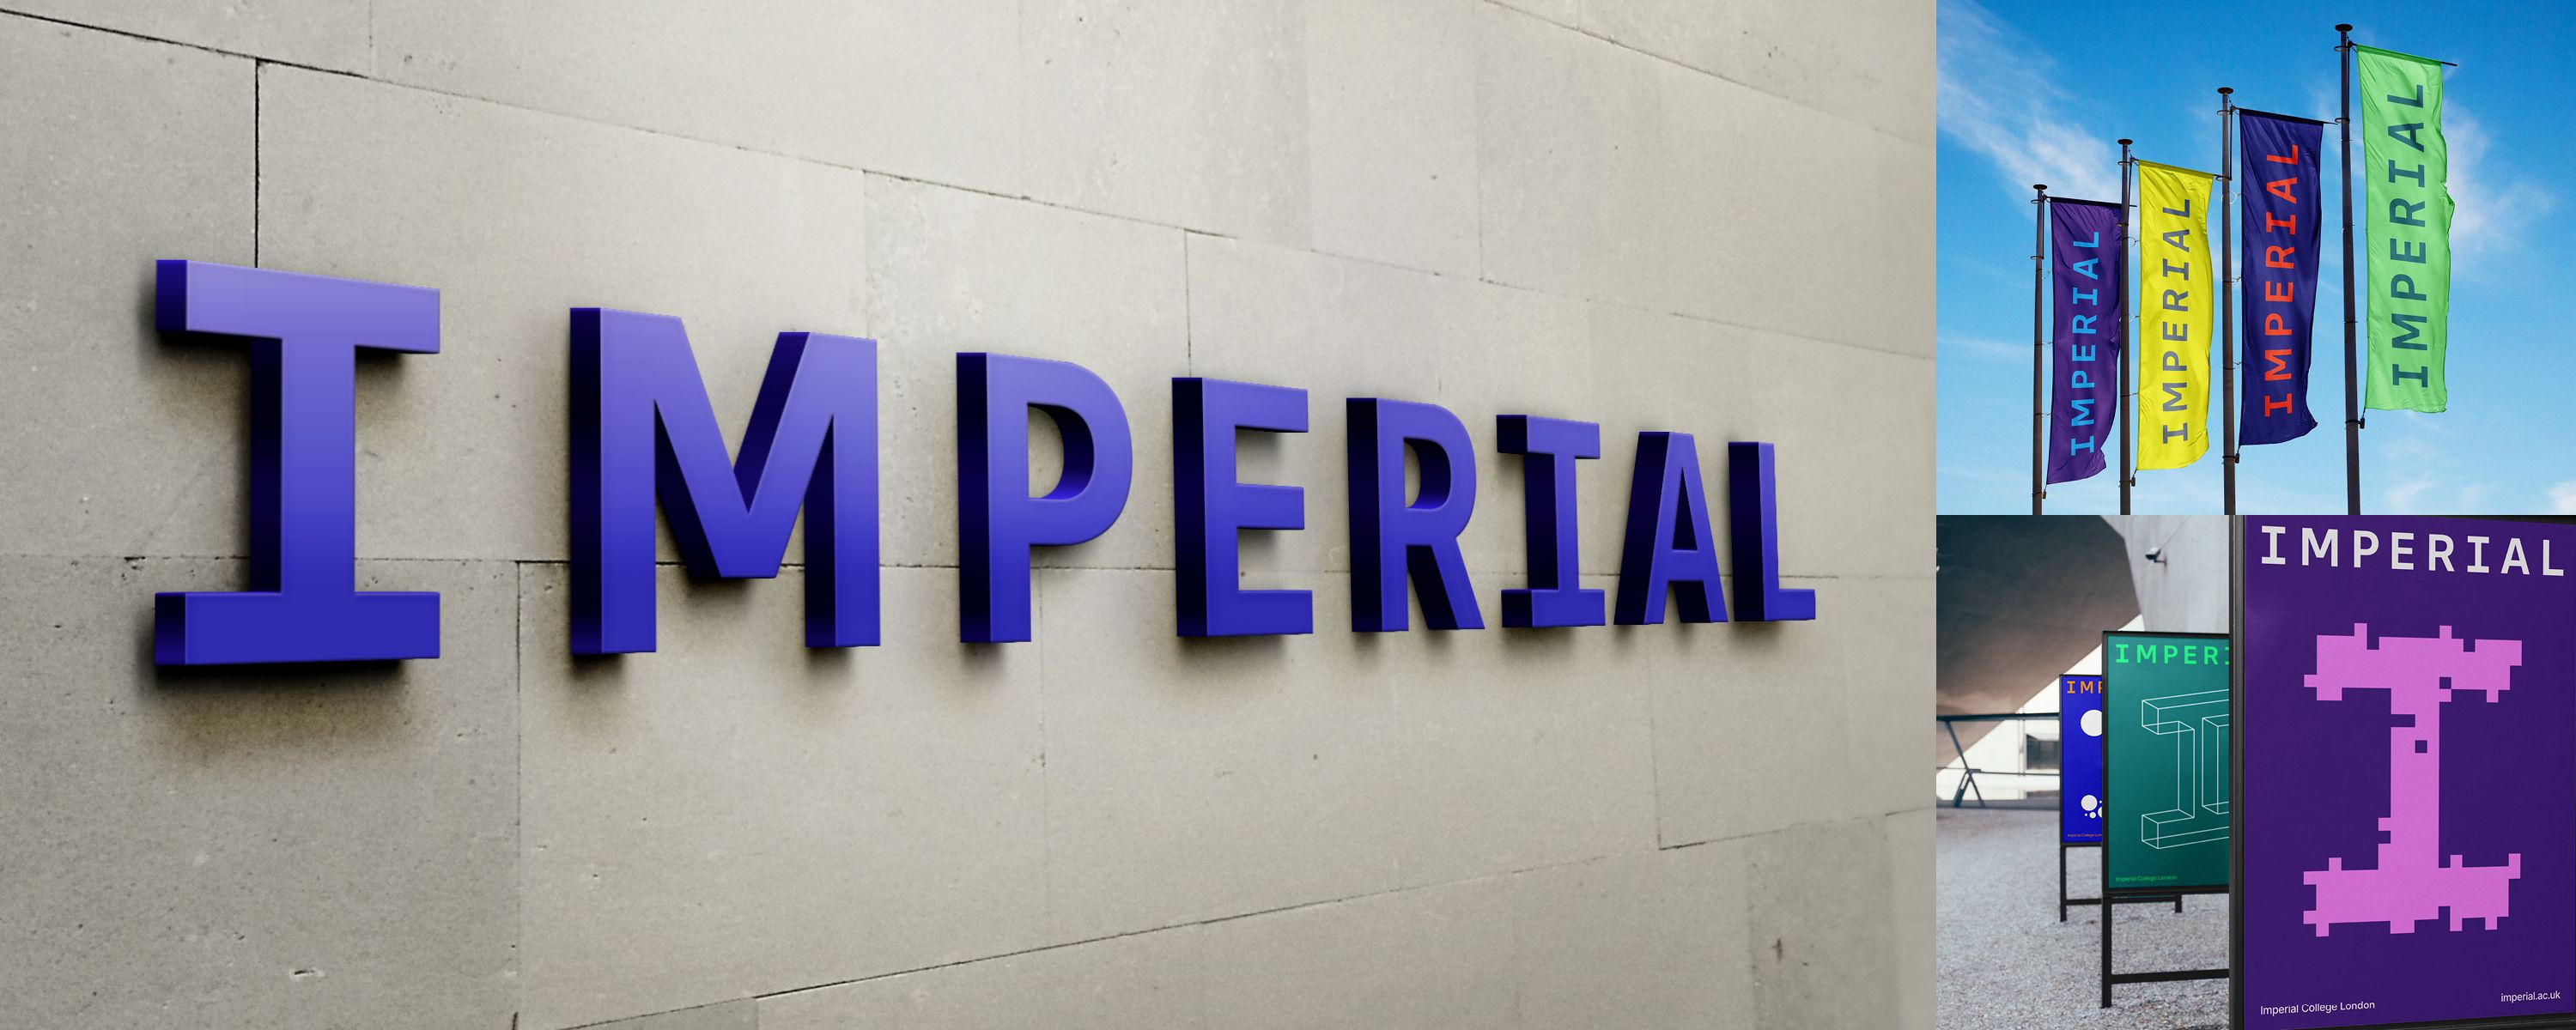 New Imperial logo examples